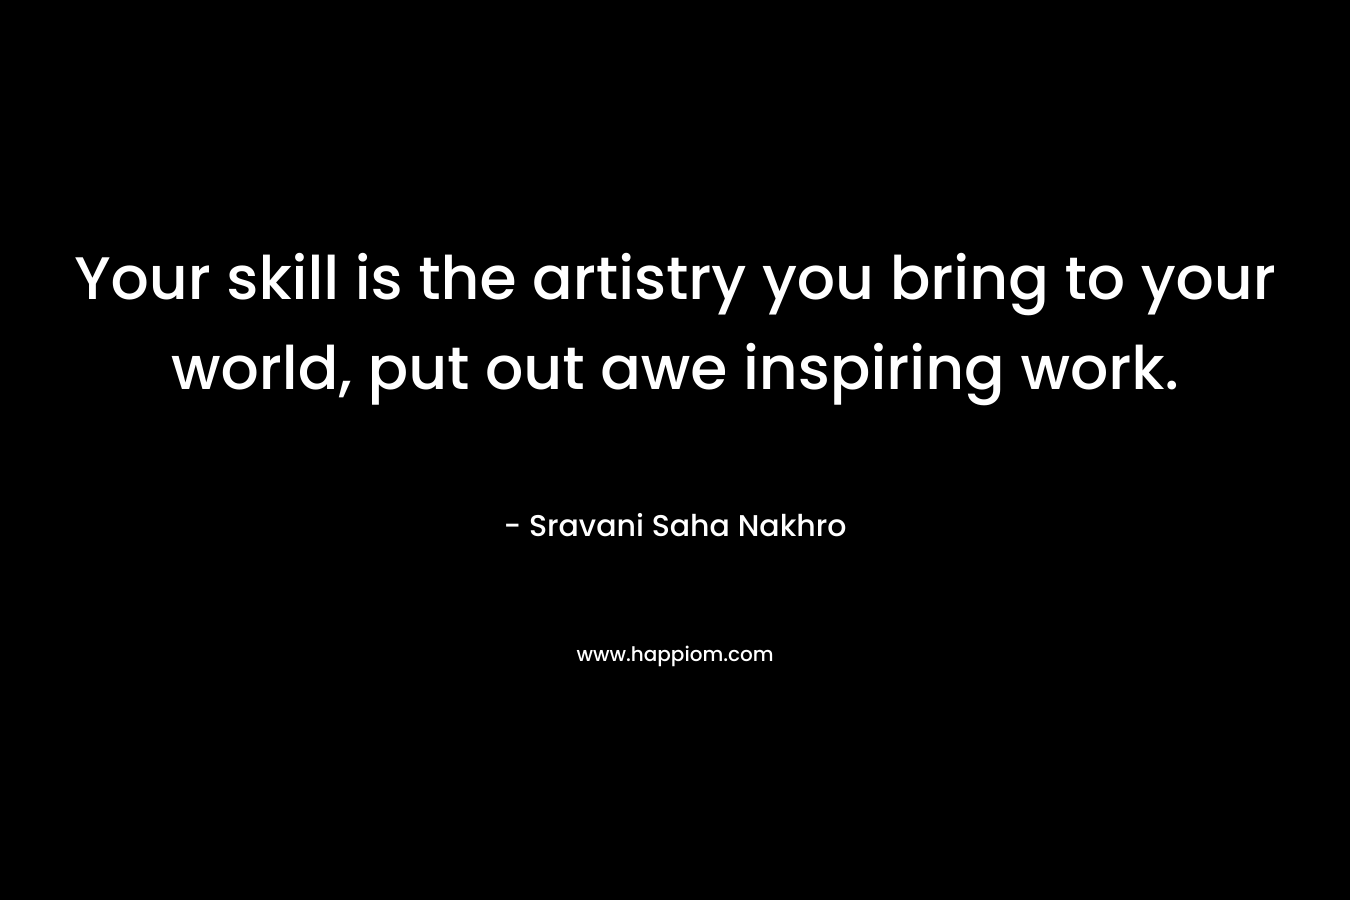 Your skill is the artistry you bring to your world, put out awe inspiring work. – Sravani Saha Nakhro